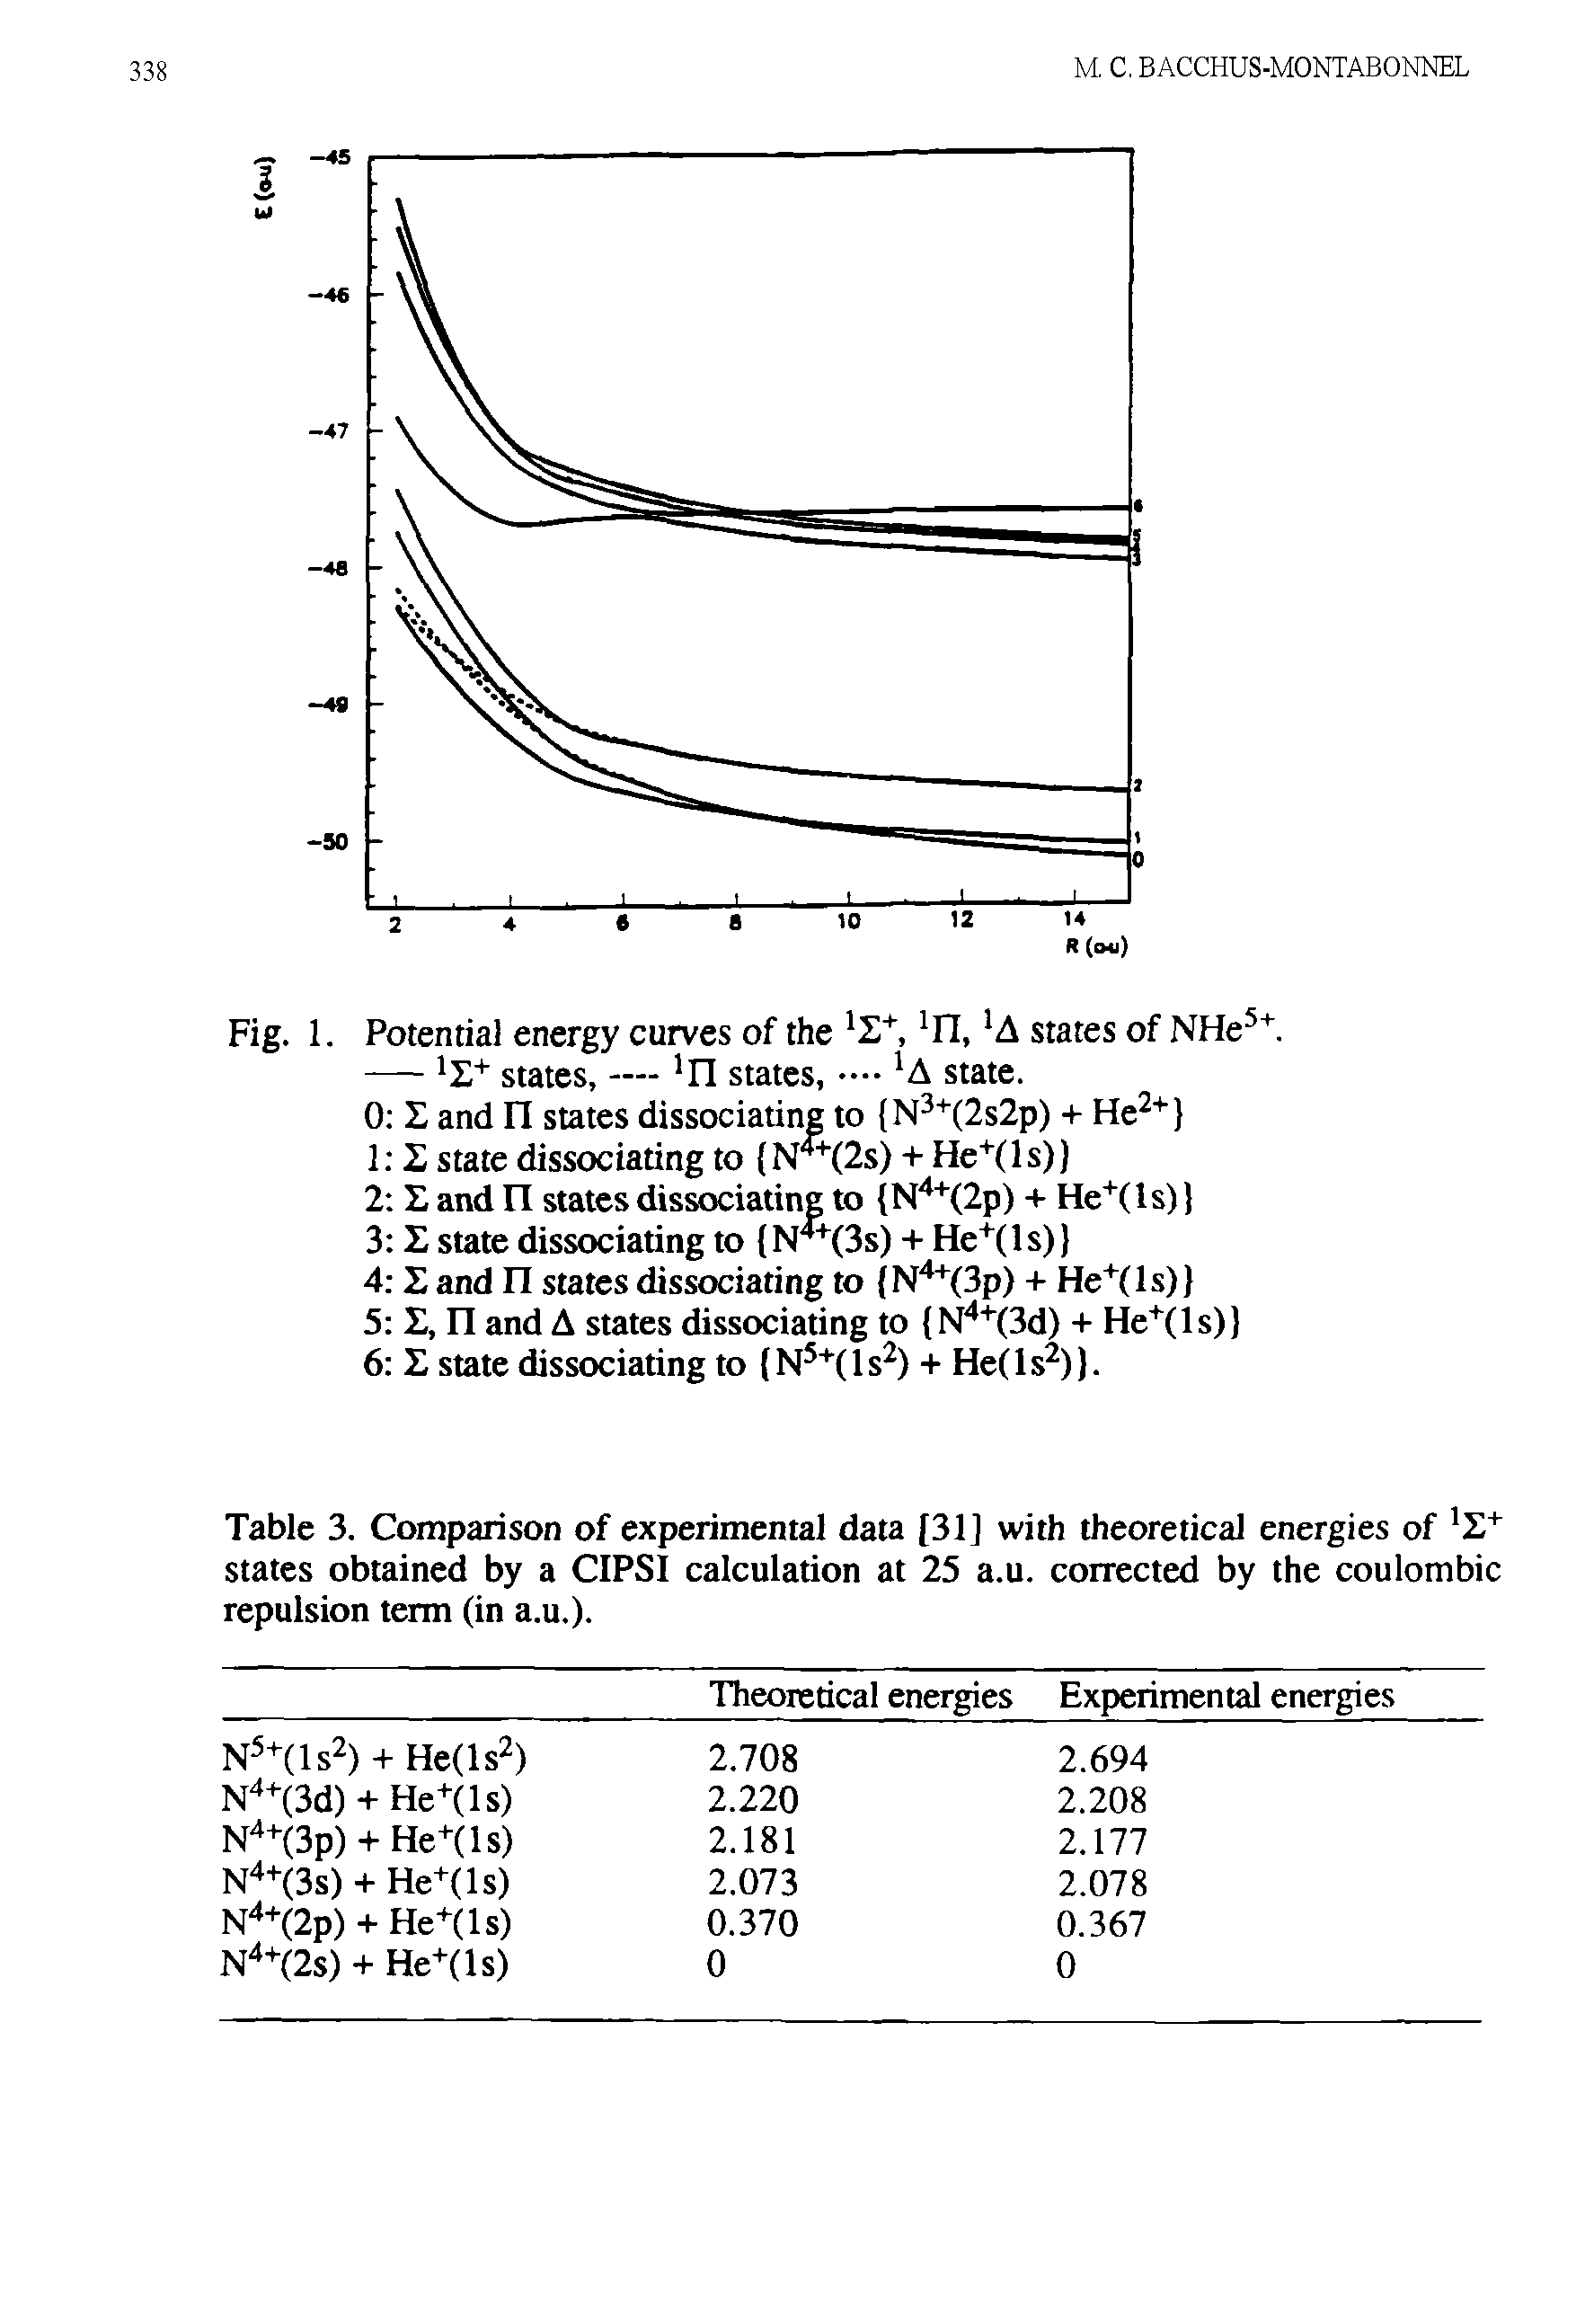 Table 3. Comparison of experimental data [31] with theoretical energies of Z states obtained by a CIPSI calculation at 25 a.u. corrected by the coulombic repulsion term (in a.u.).